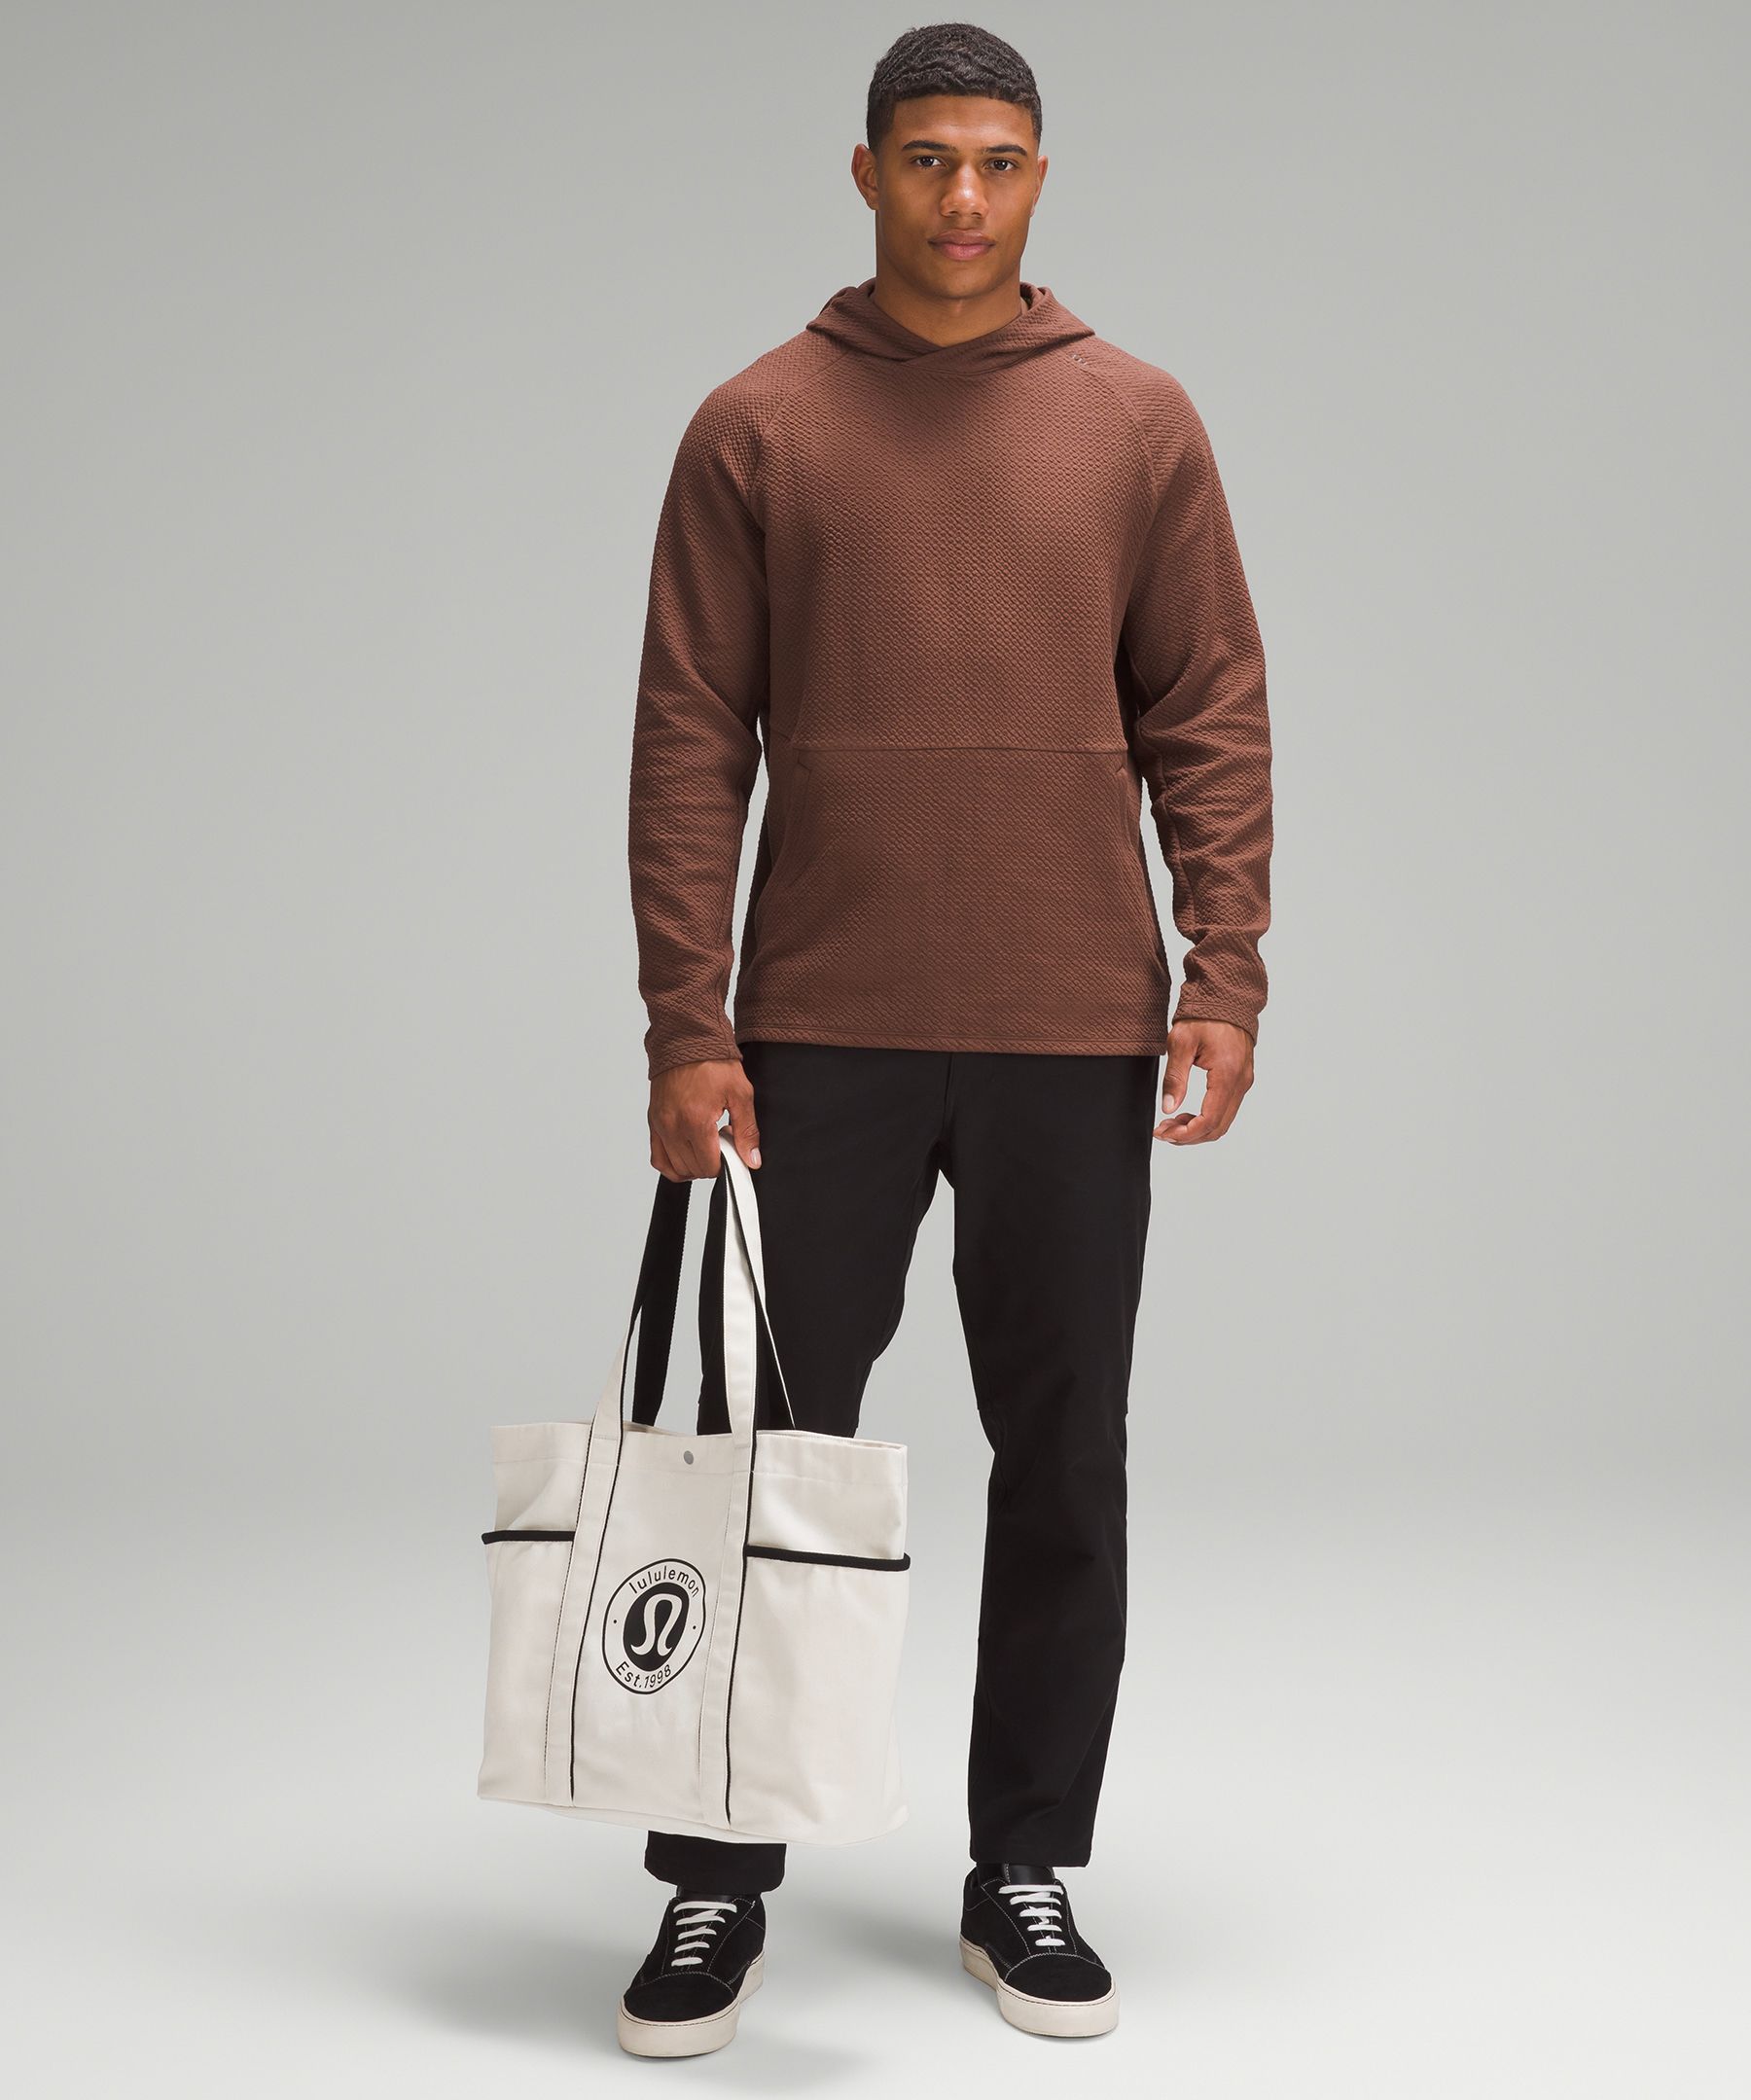 ad REVIEWING THE DAILY MULTI-POCKET CANVAS TOTE BAG #lululemoncreator 